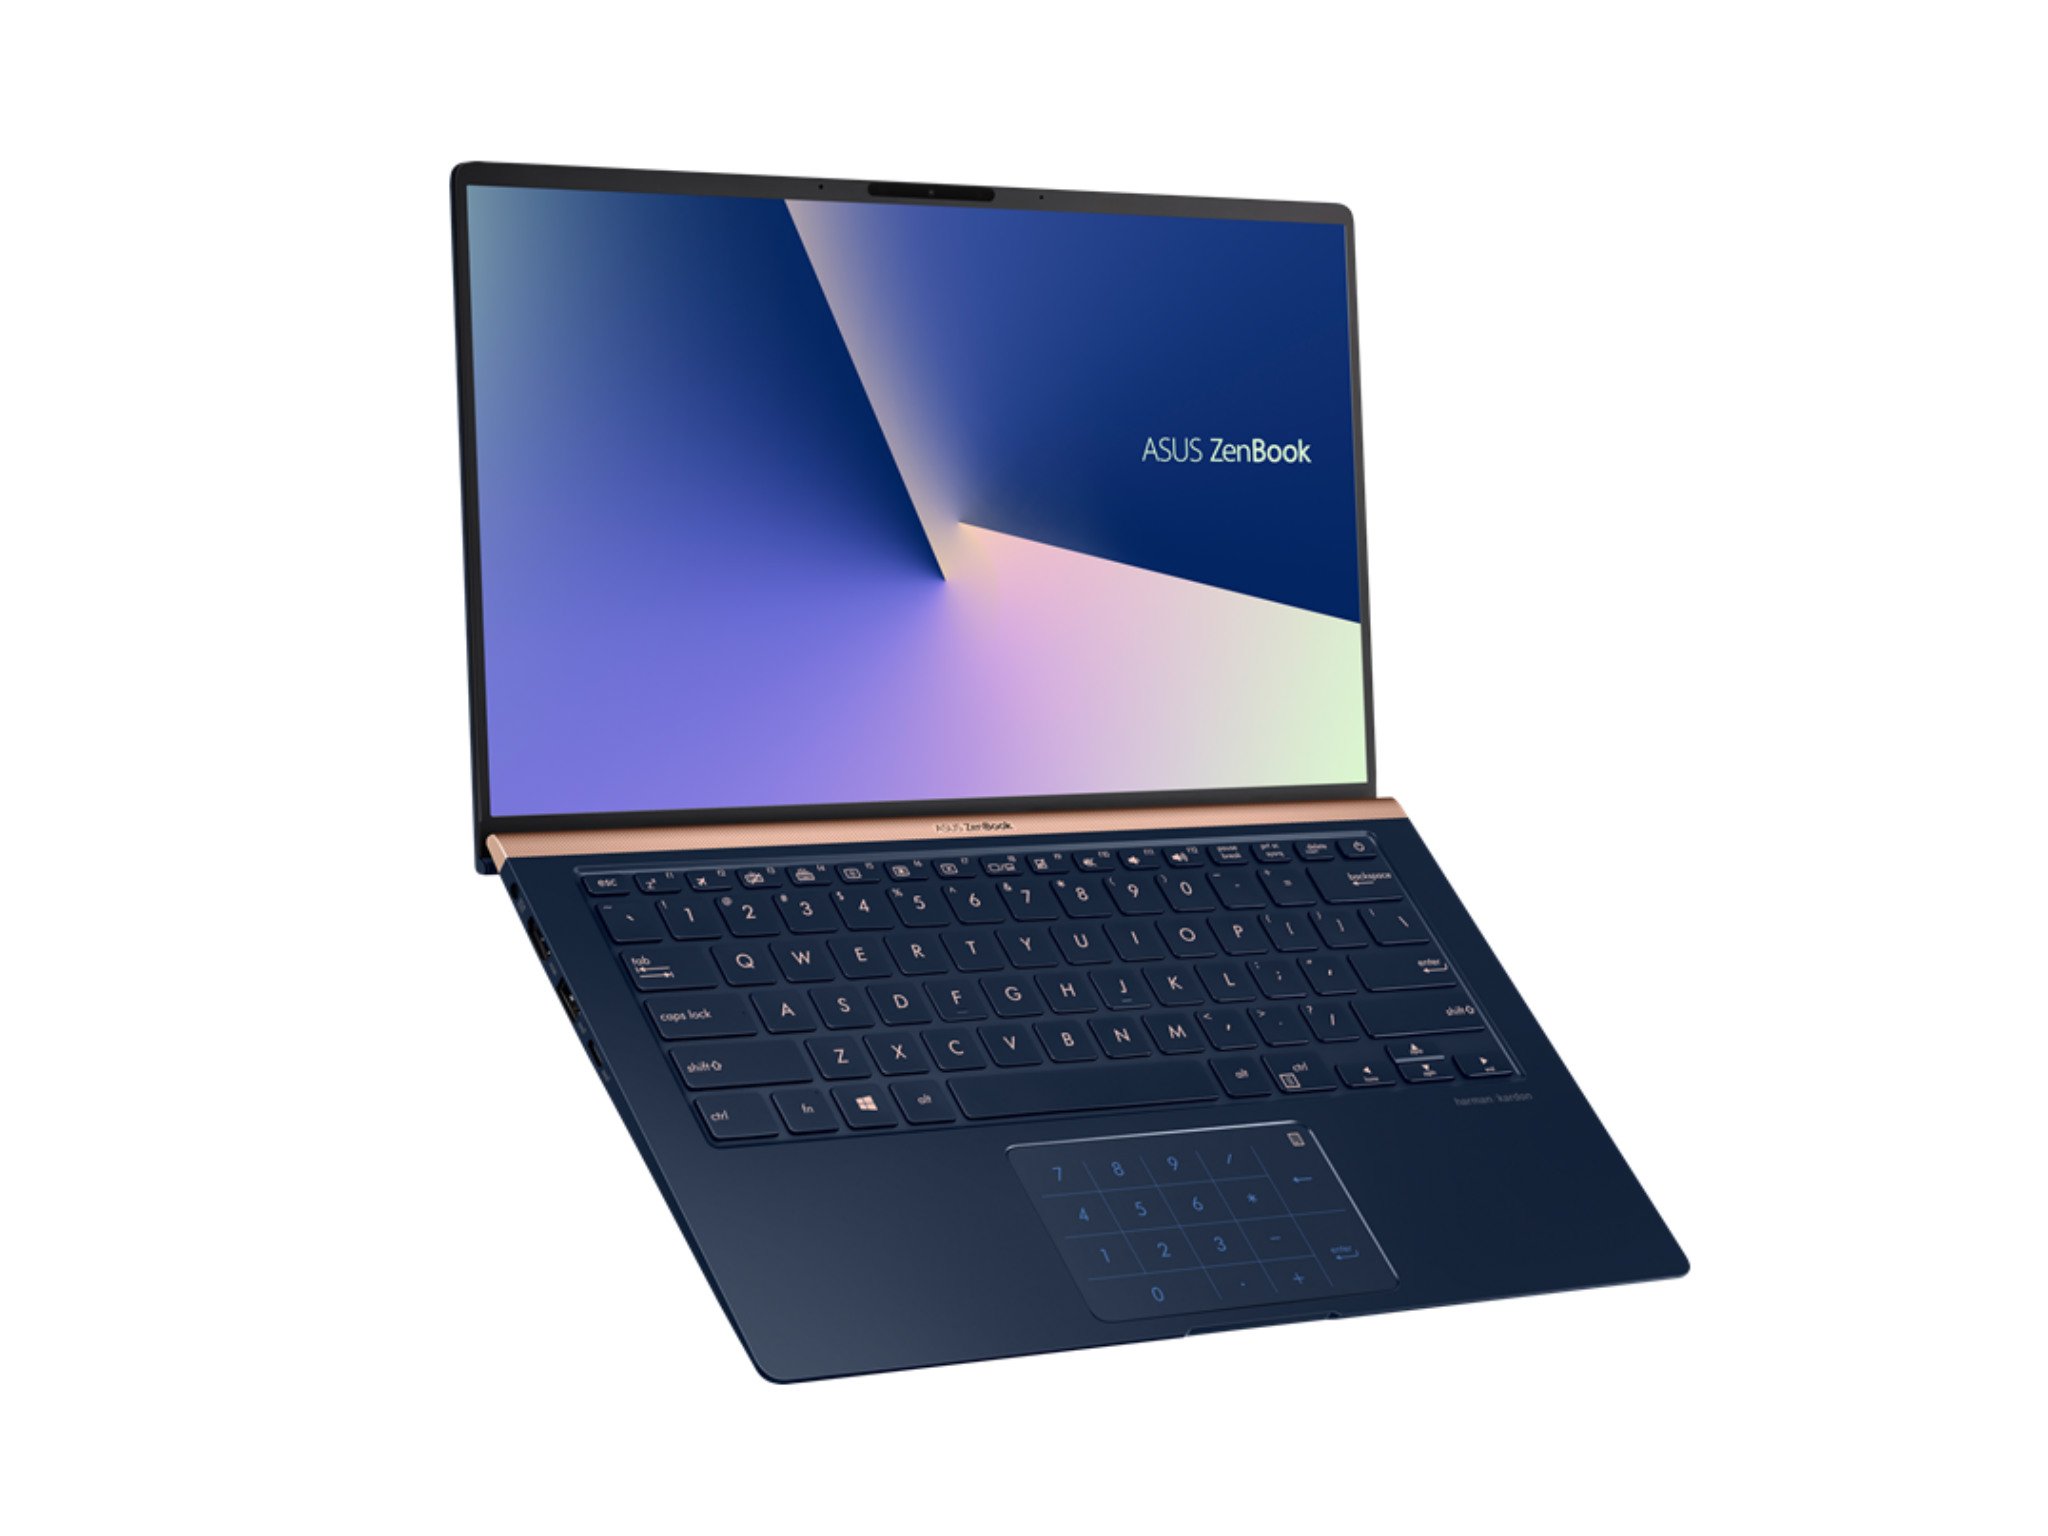 ASUS' overhauled 2018 ZenBook lineup now available starting at $850